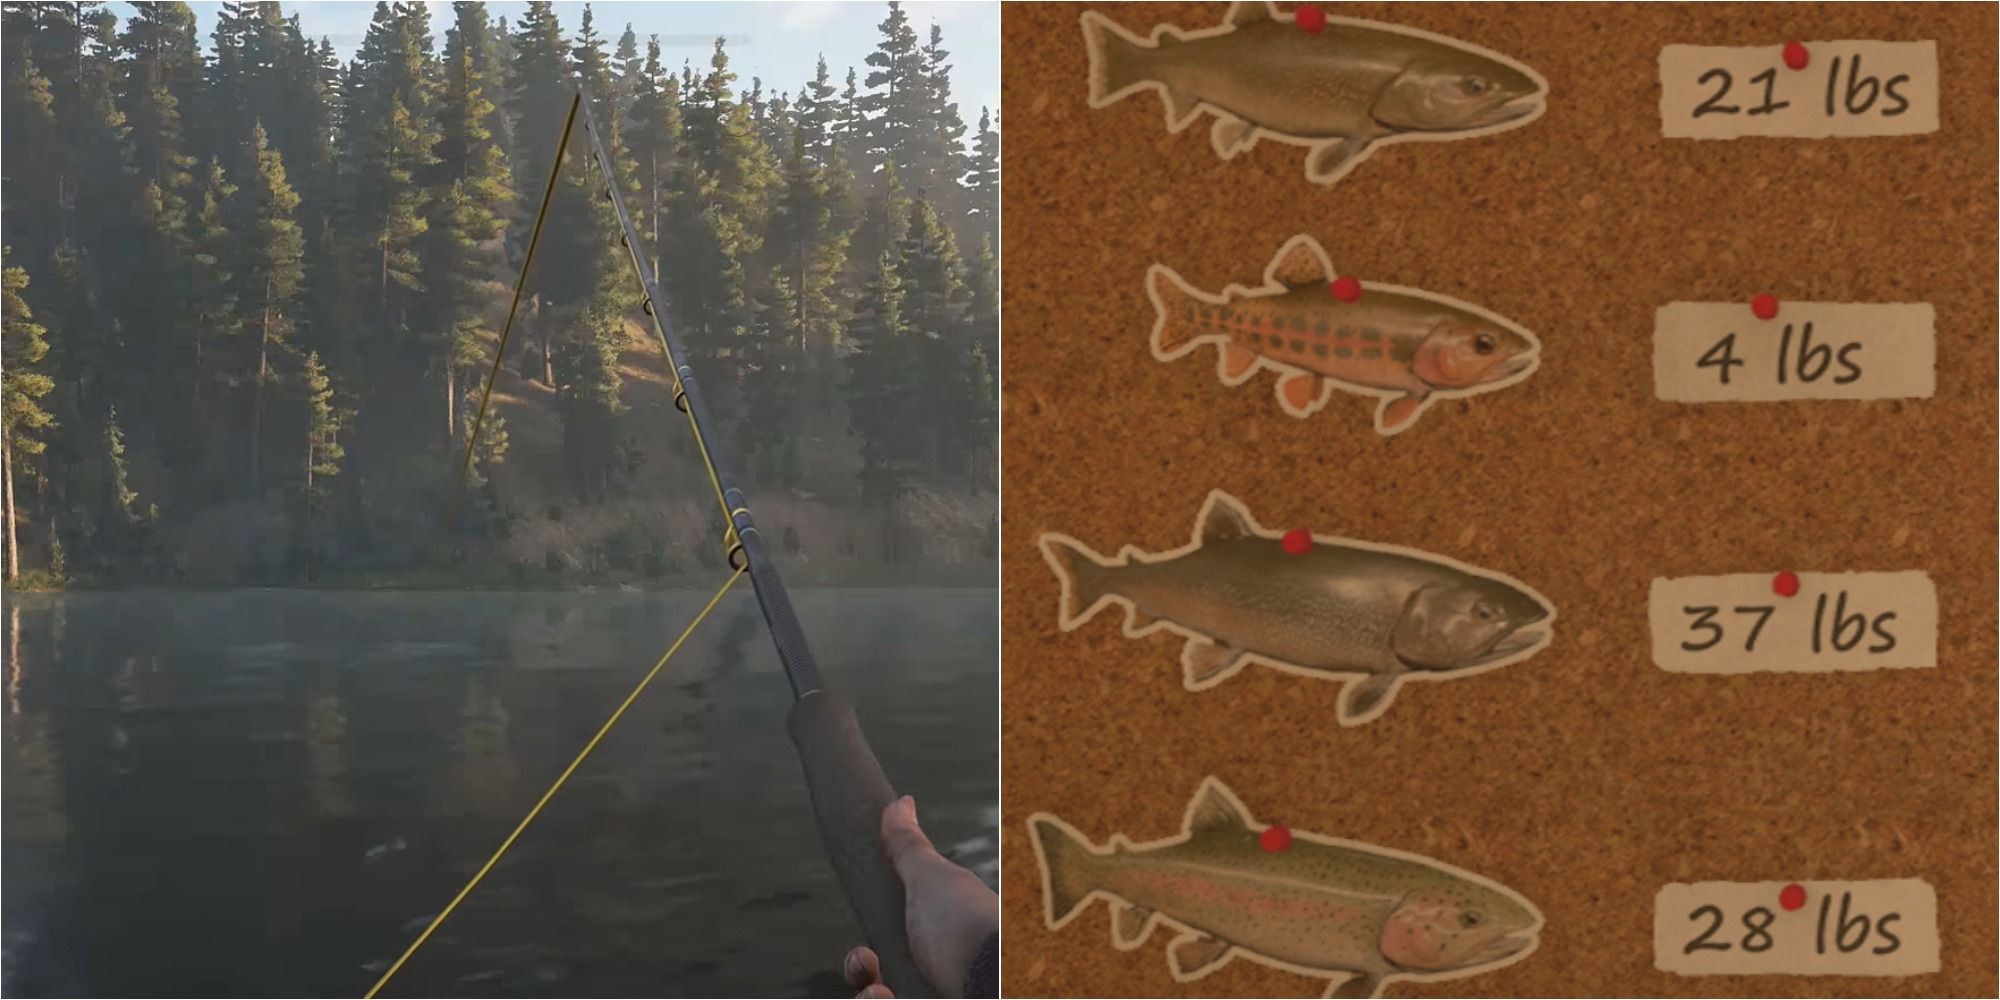 How To Acquire The Old B Fishing Rod In Far Cry 5